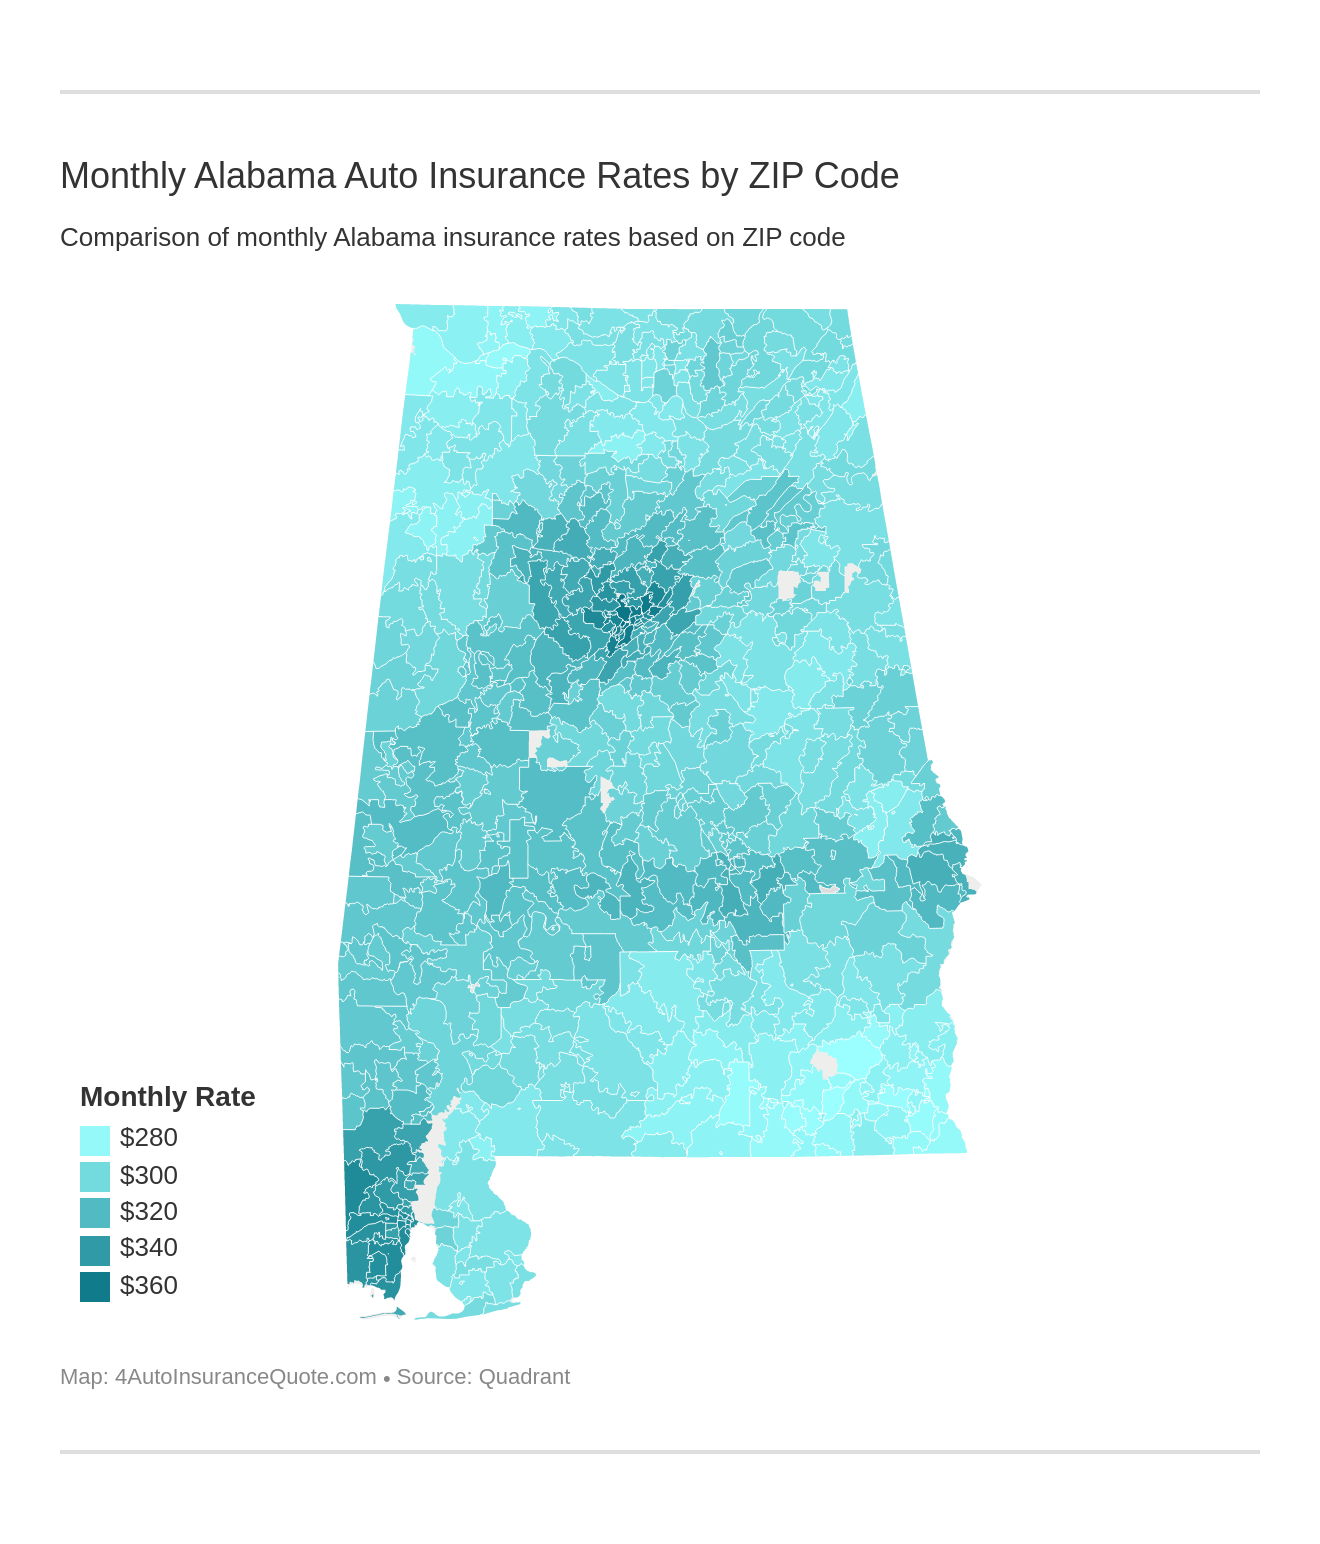 Monthly Alabama Auto Insurance Rates by ZIP Code